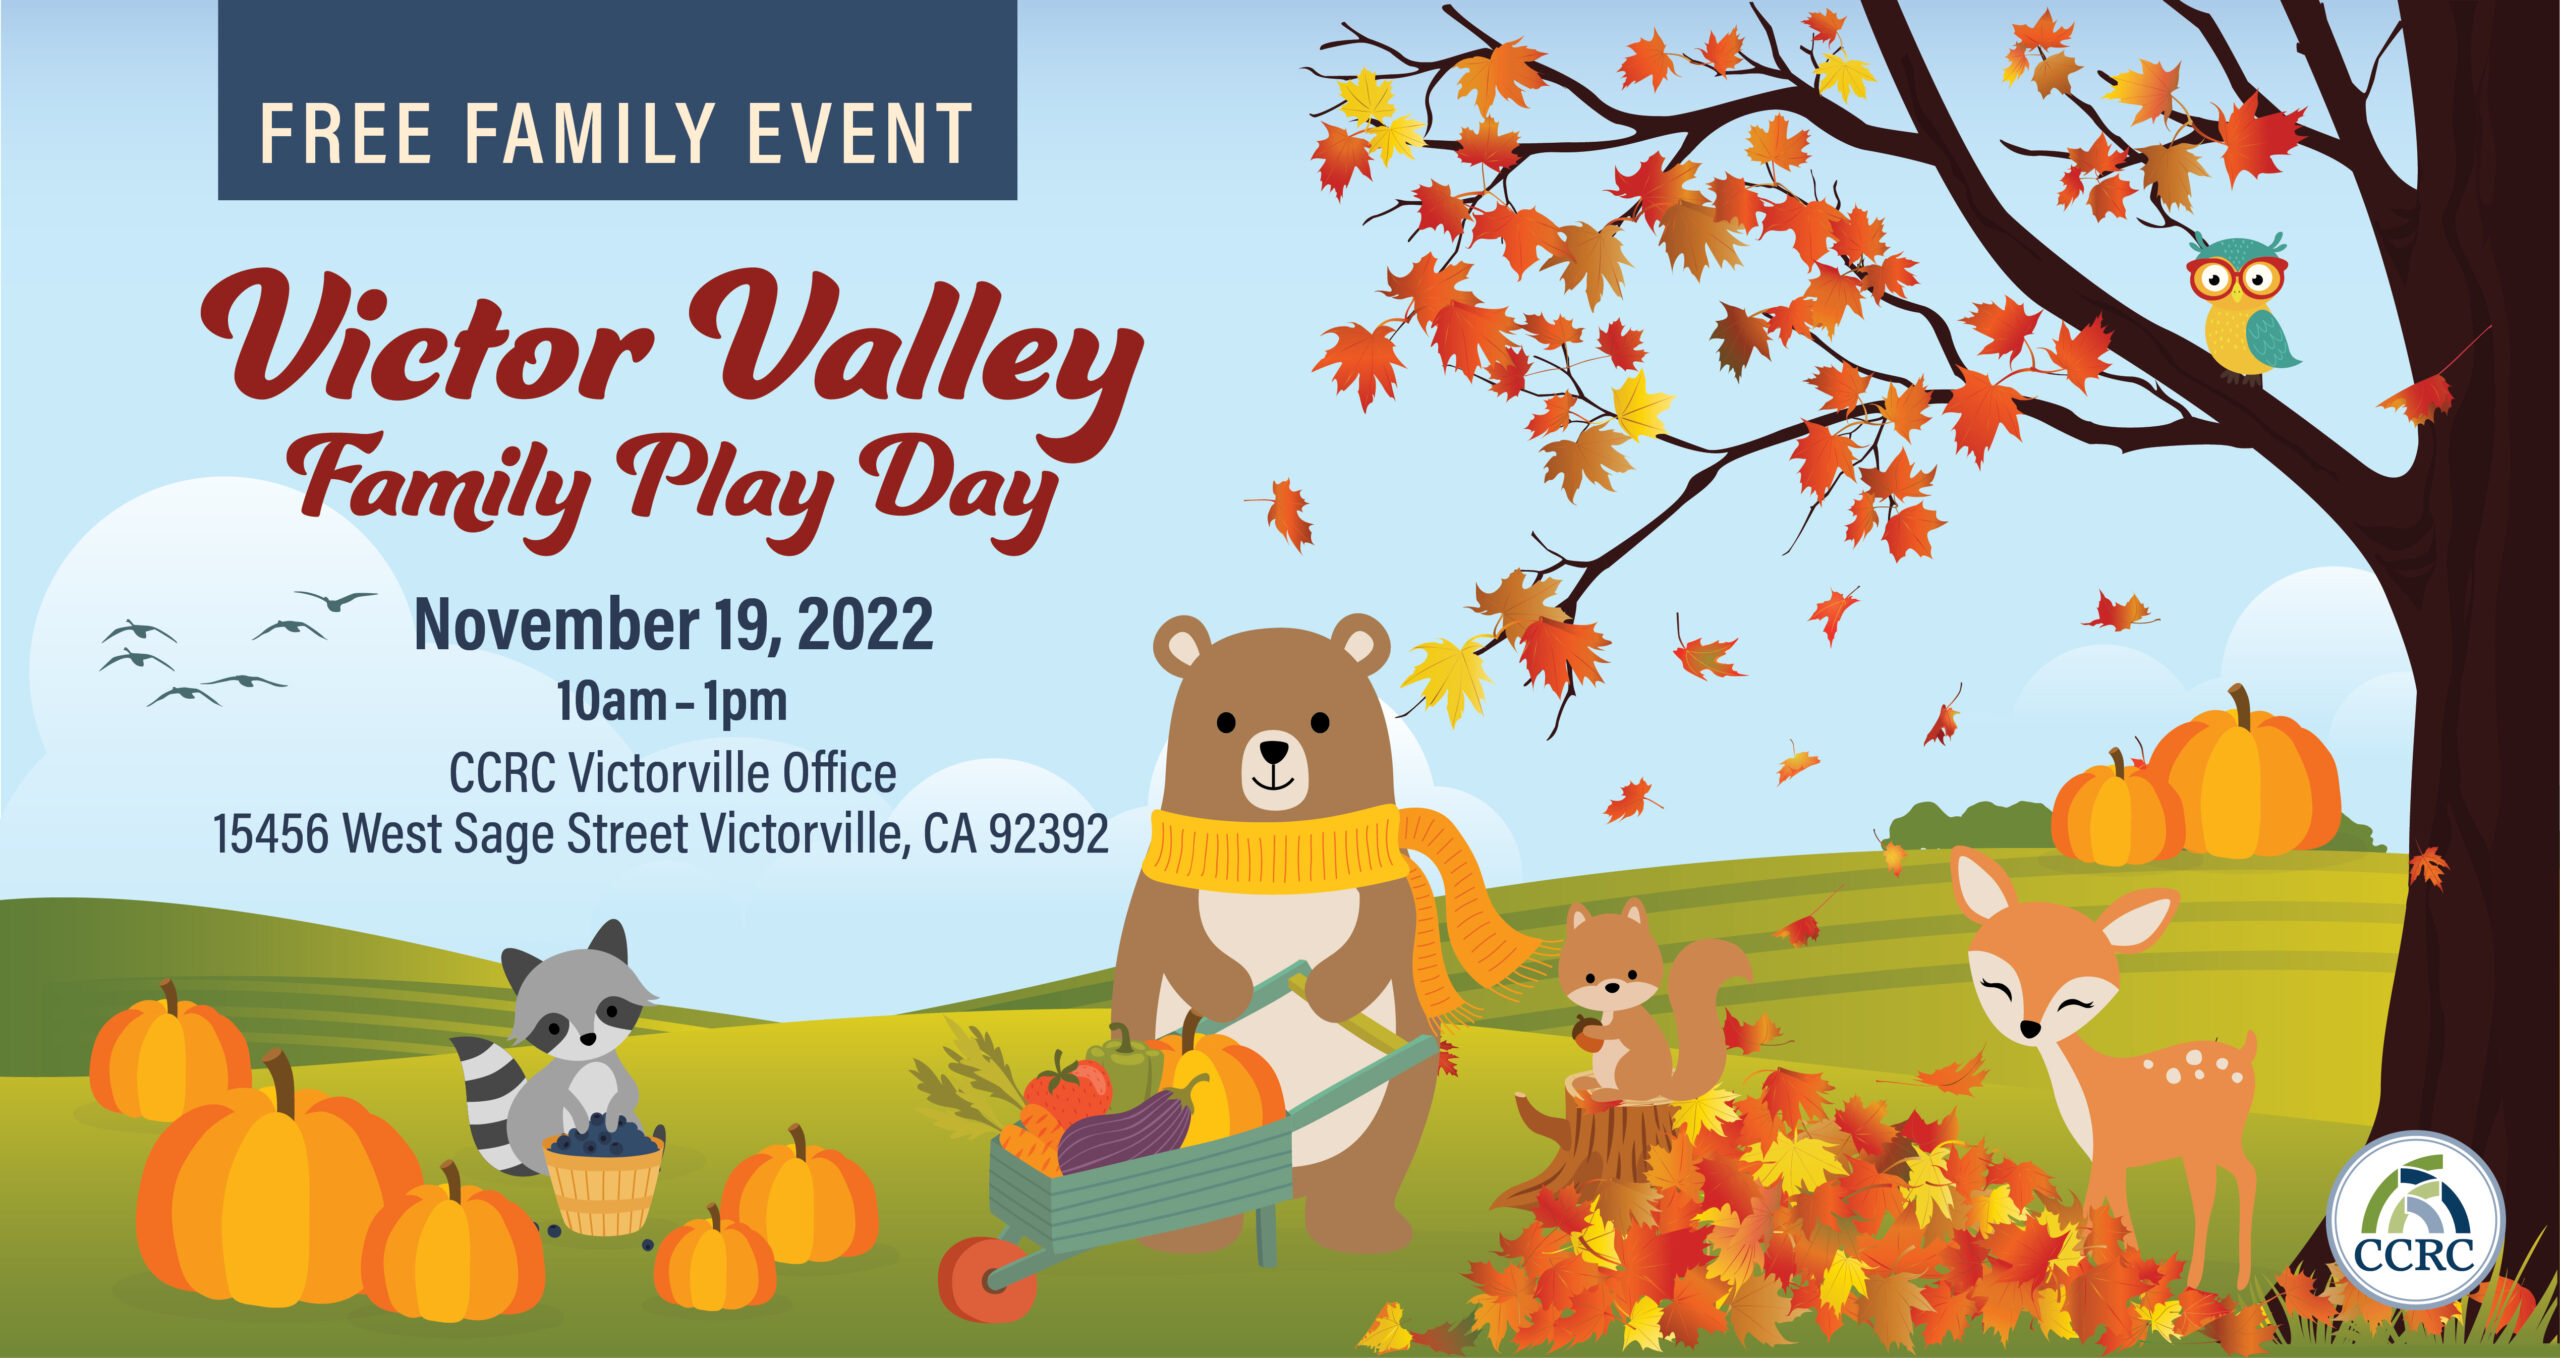 A promotional image for CCRC's Victor Valley Family Play Day taking place November 19, 2022.